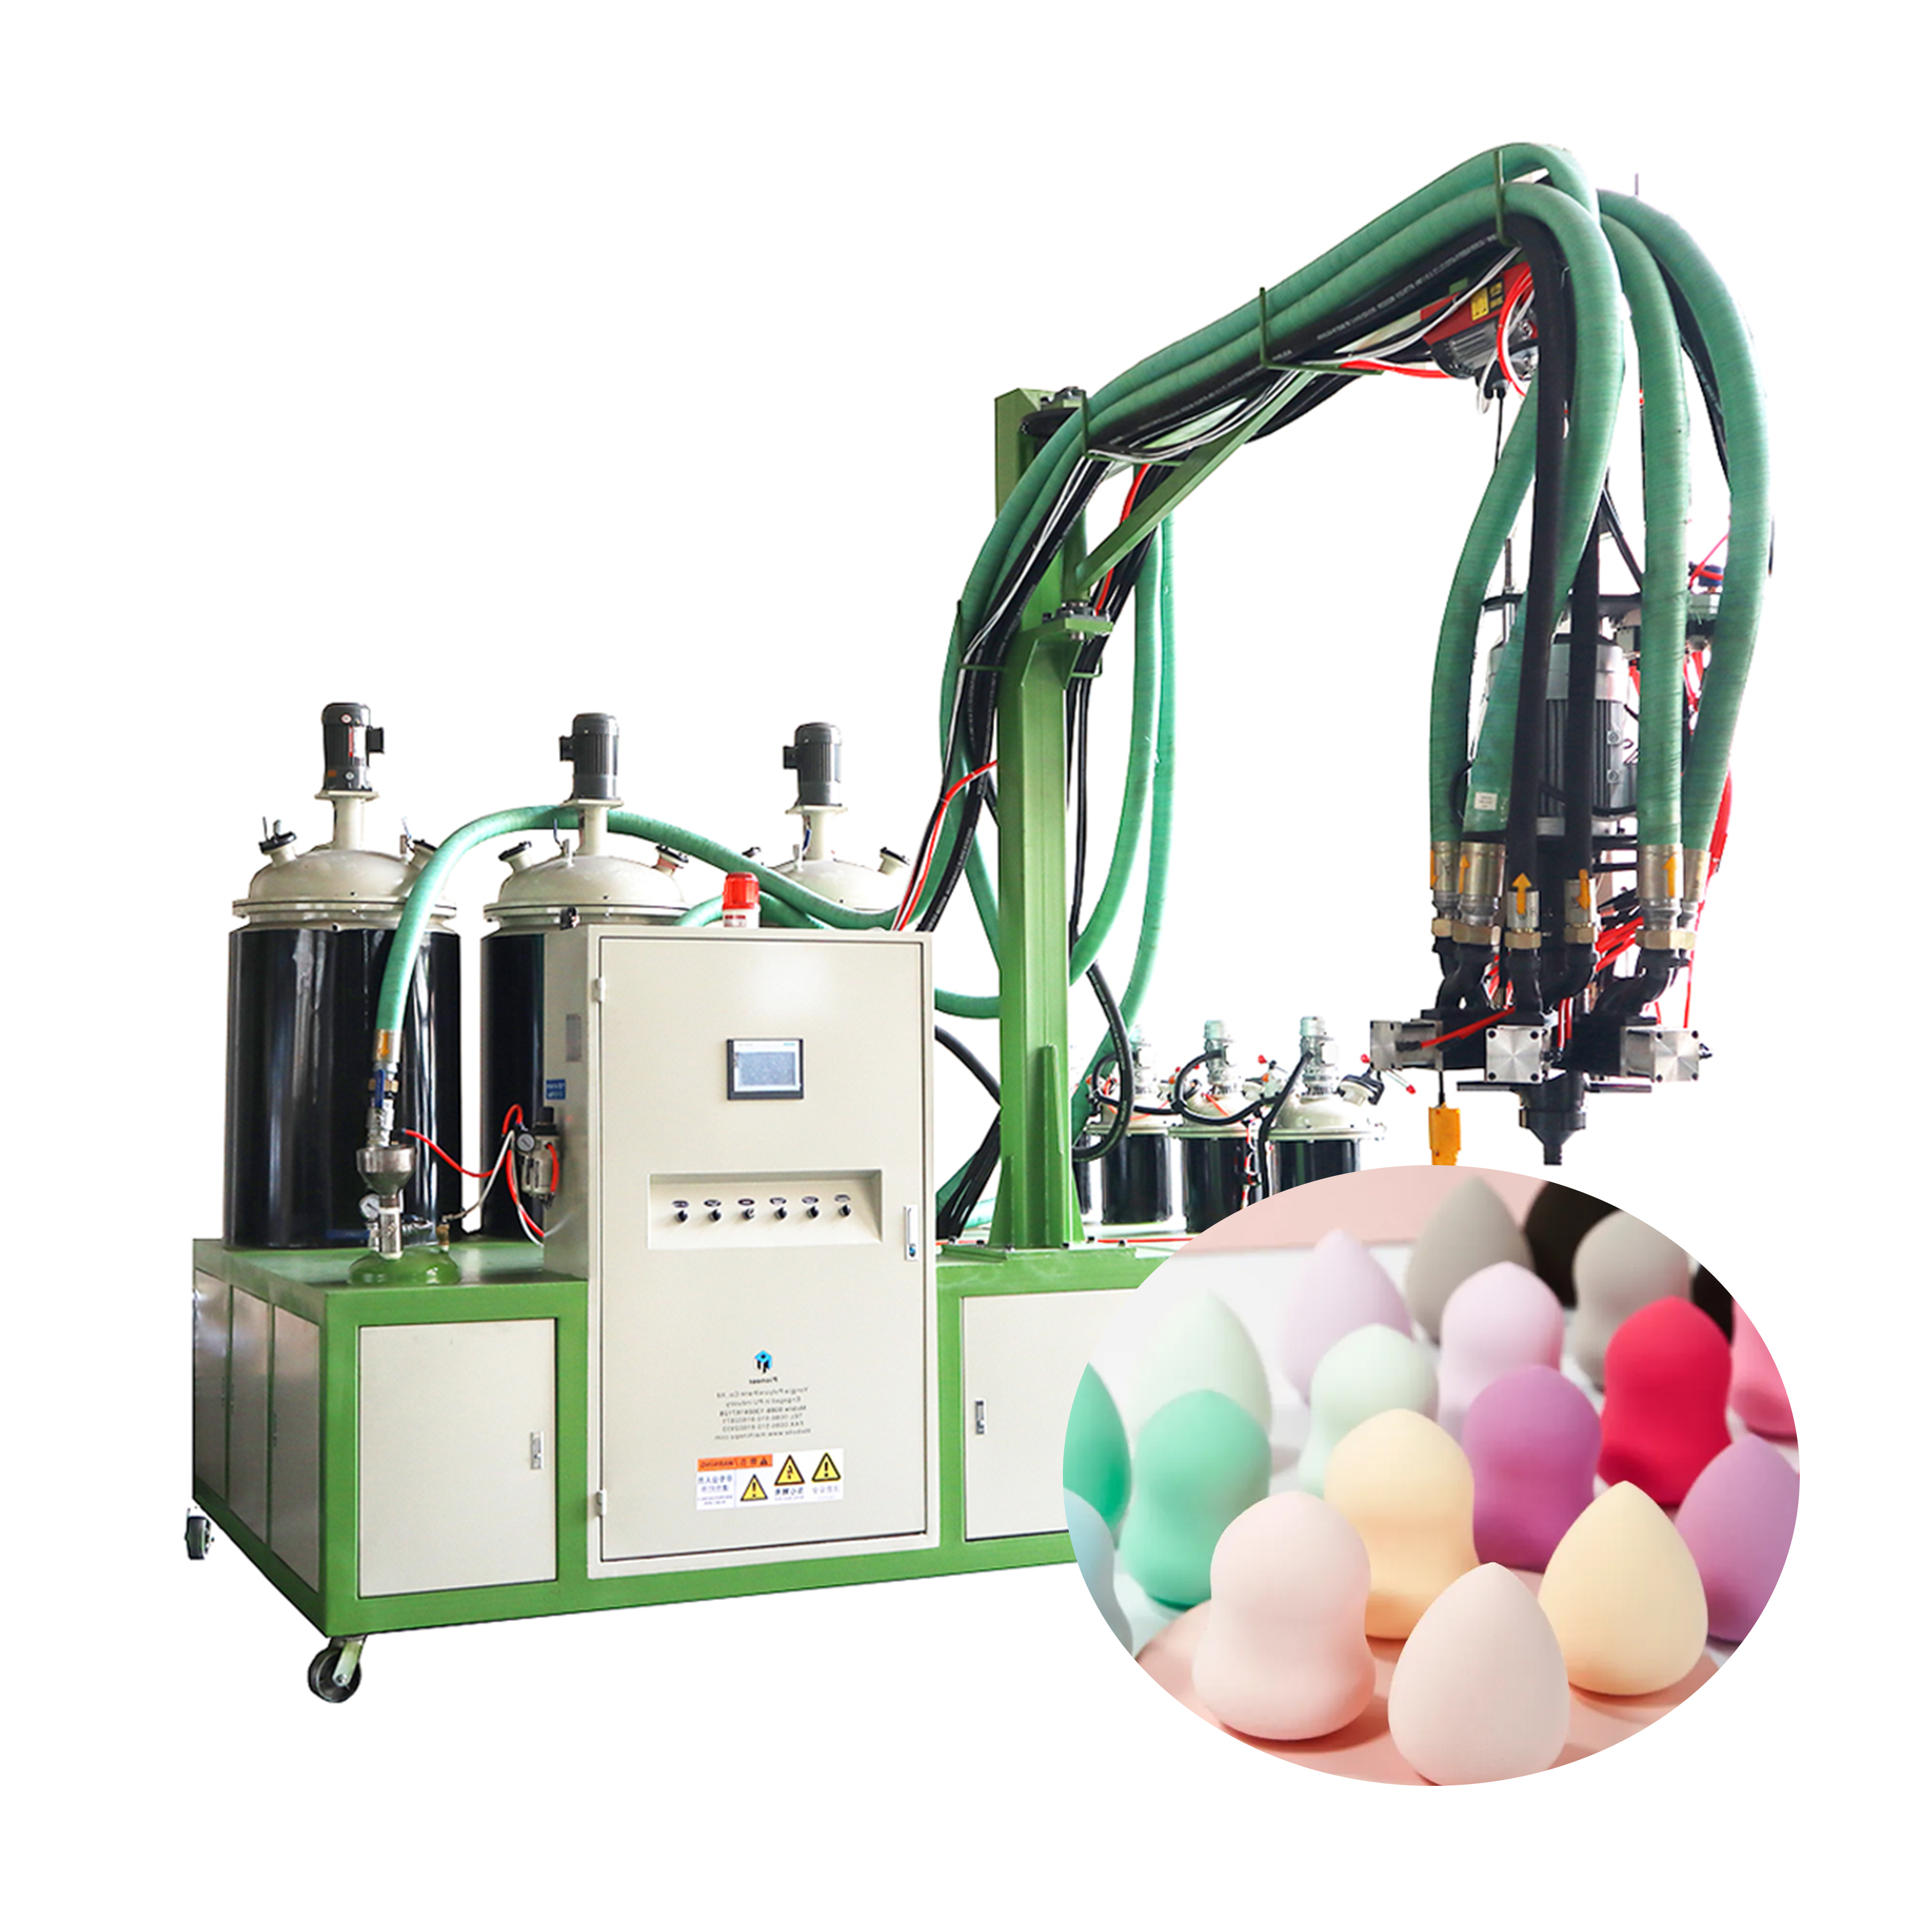 Polyurethane Low Pressure Foam Injection Machine For Makeup Sponge Featured Image